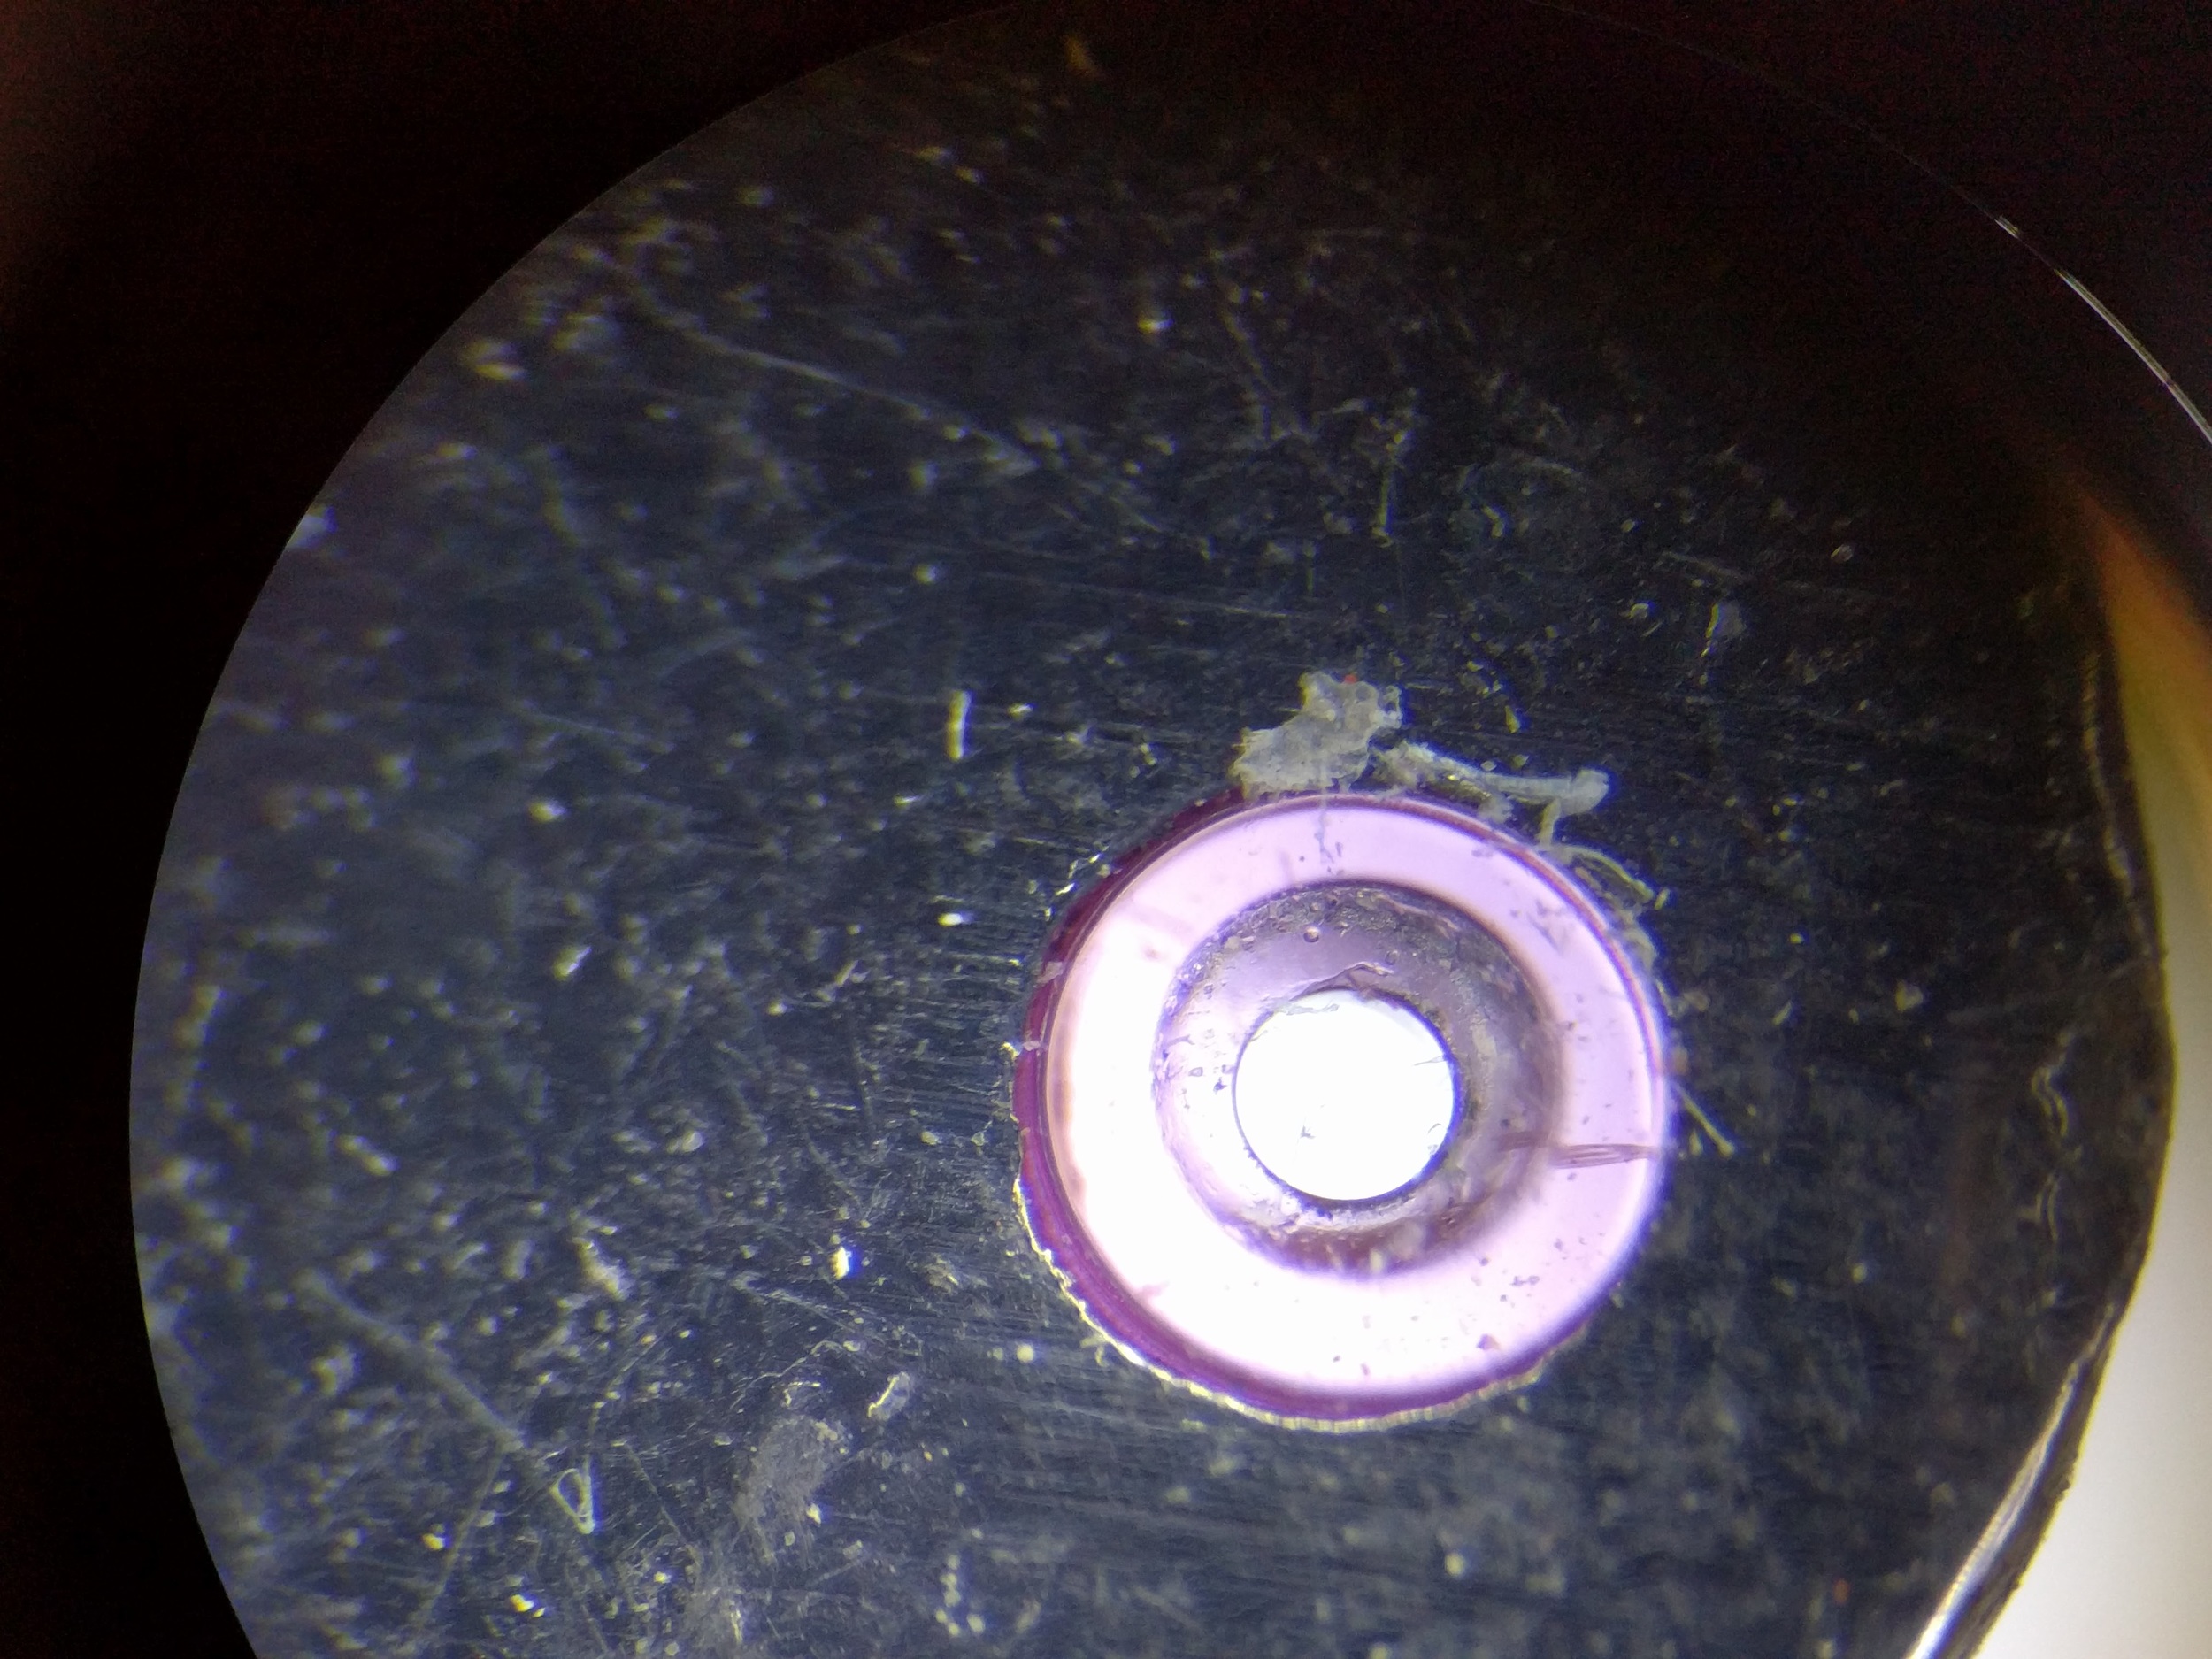  This is one of the ruby bearings found in the assembly, approximately 0.05" in diameter. 